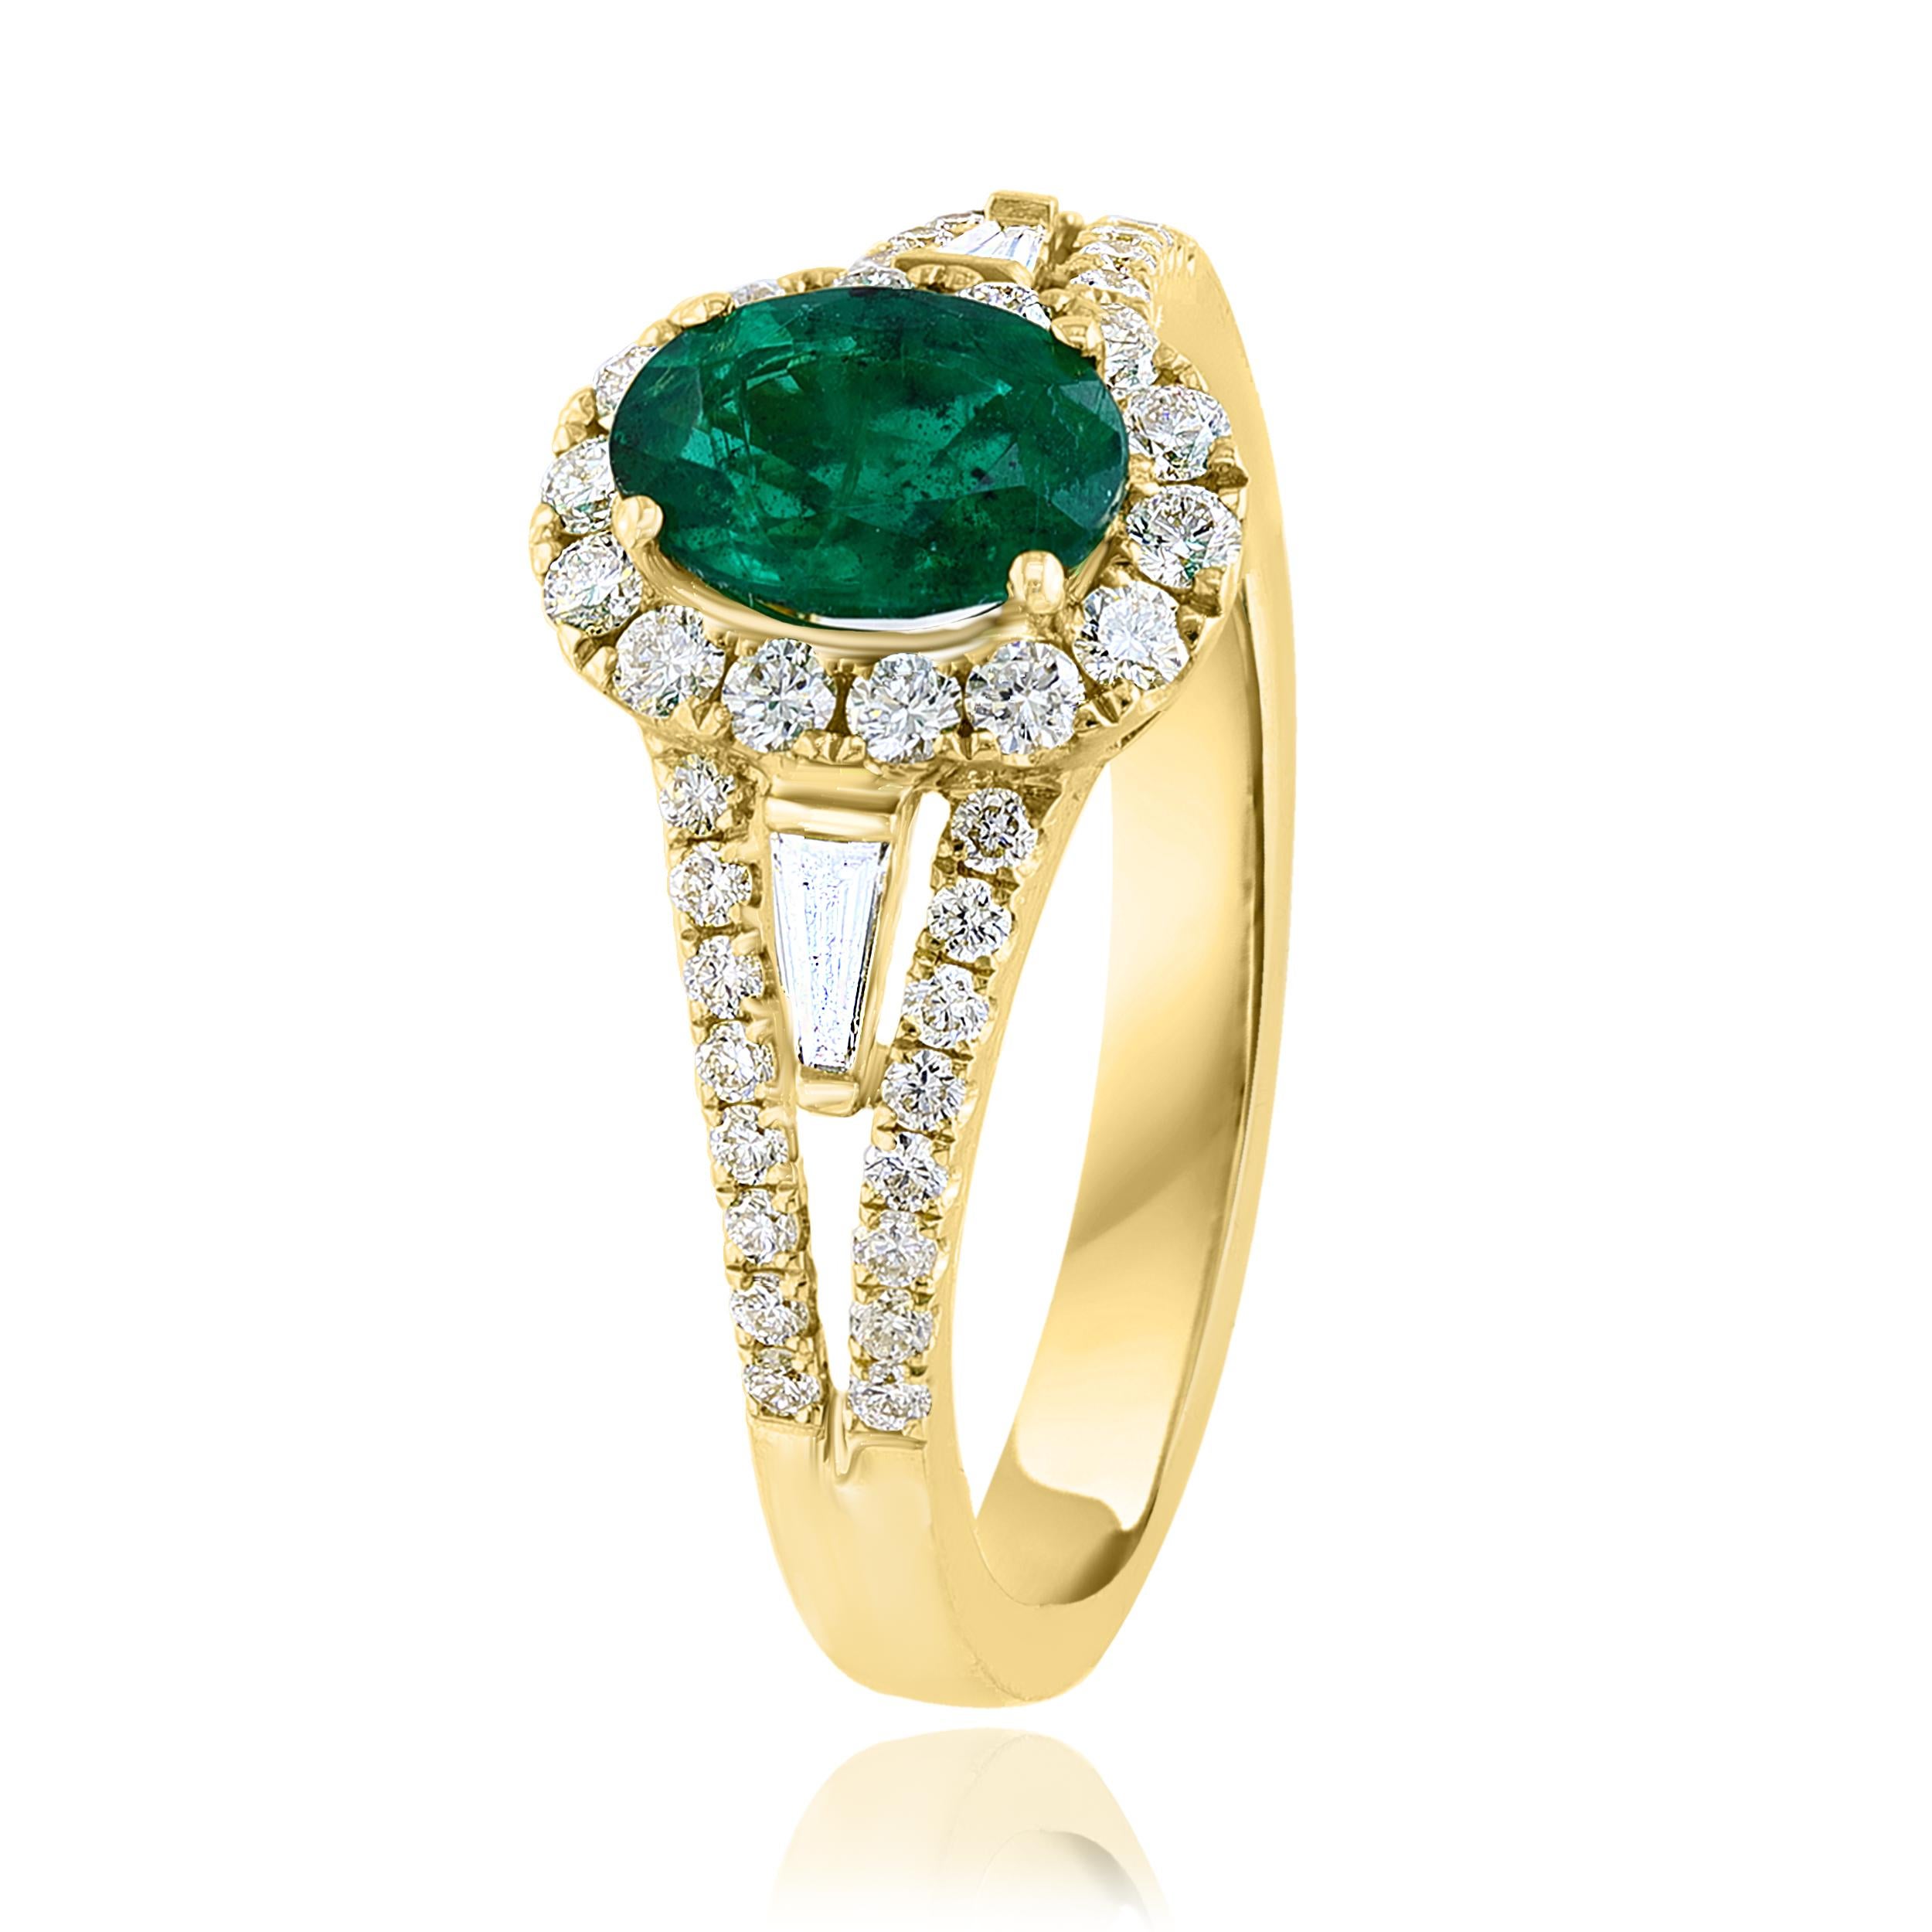 Contemporary 0.73 Carat Oval Cut Emerald and Diamond Ring in 18k Yellow Gold For Sale